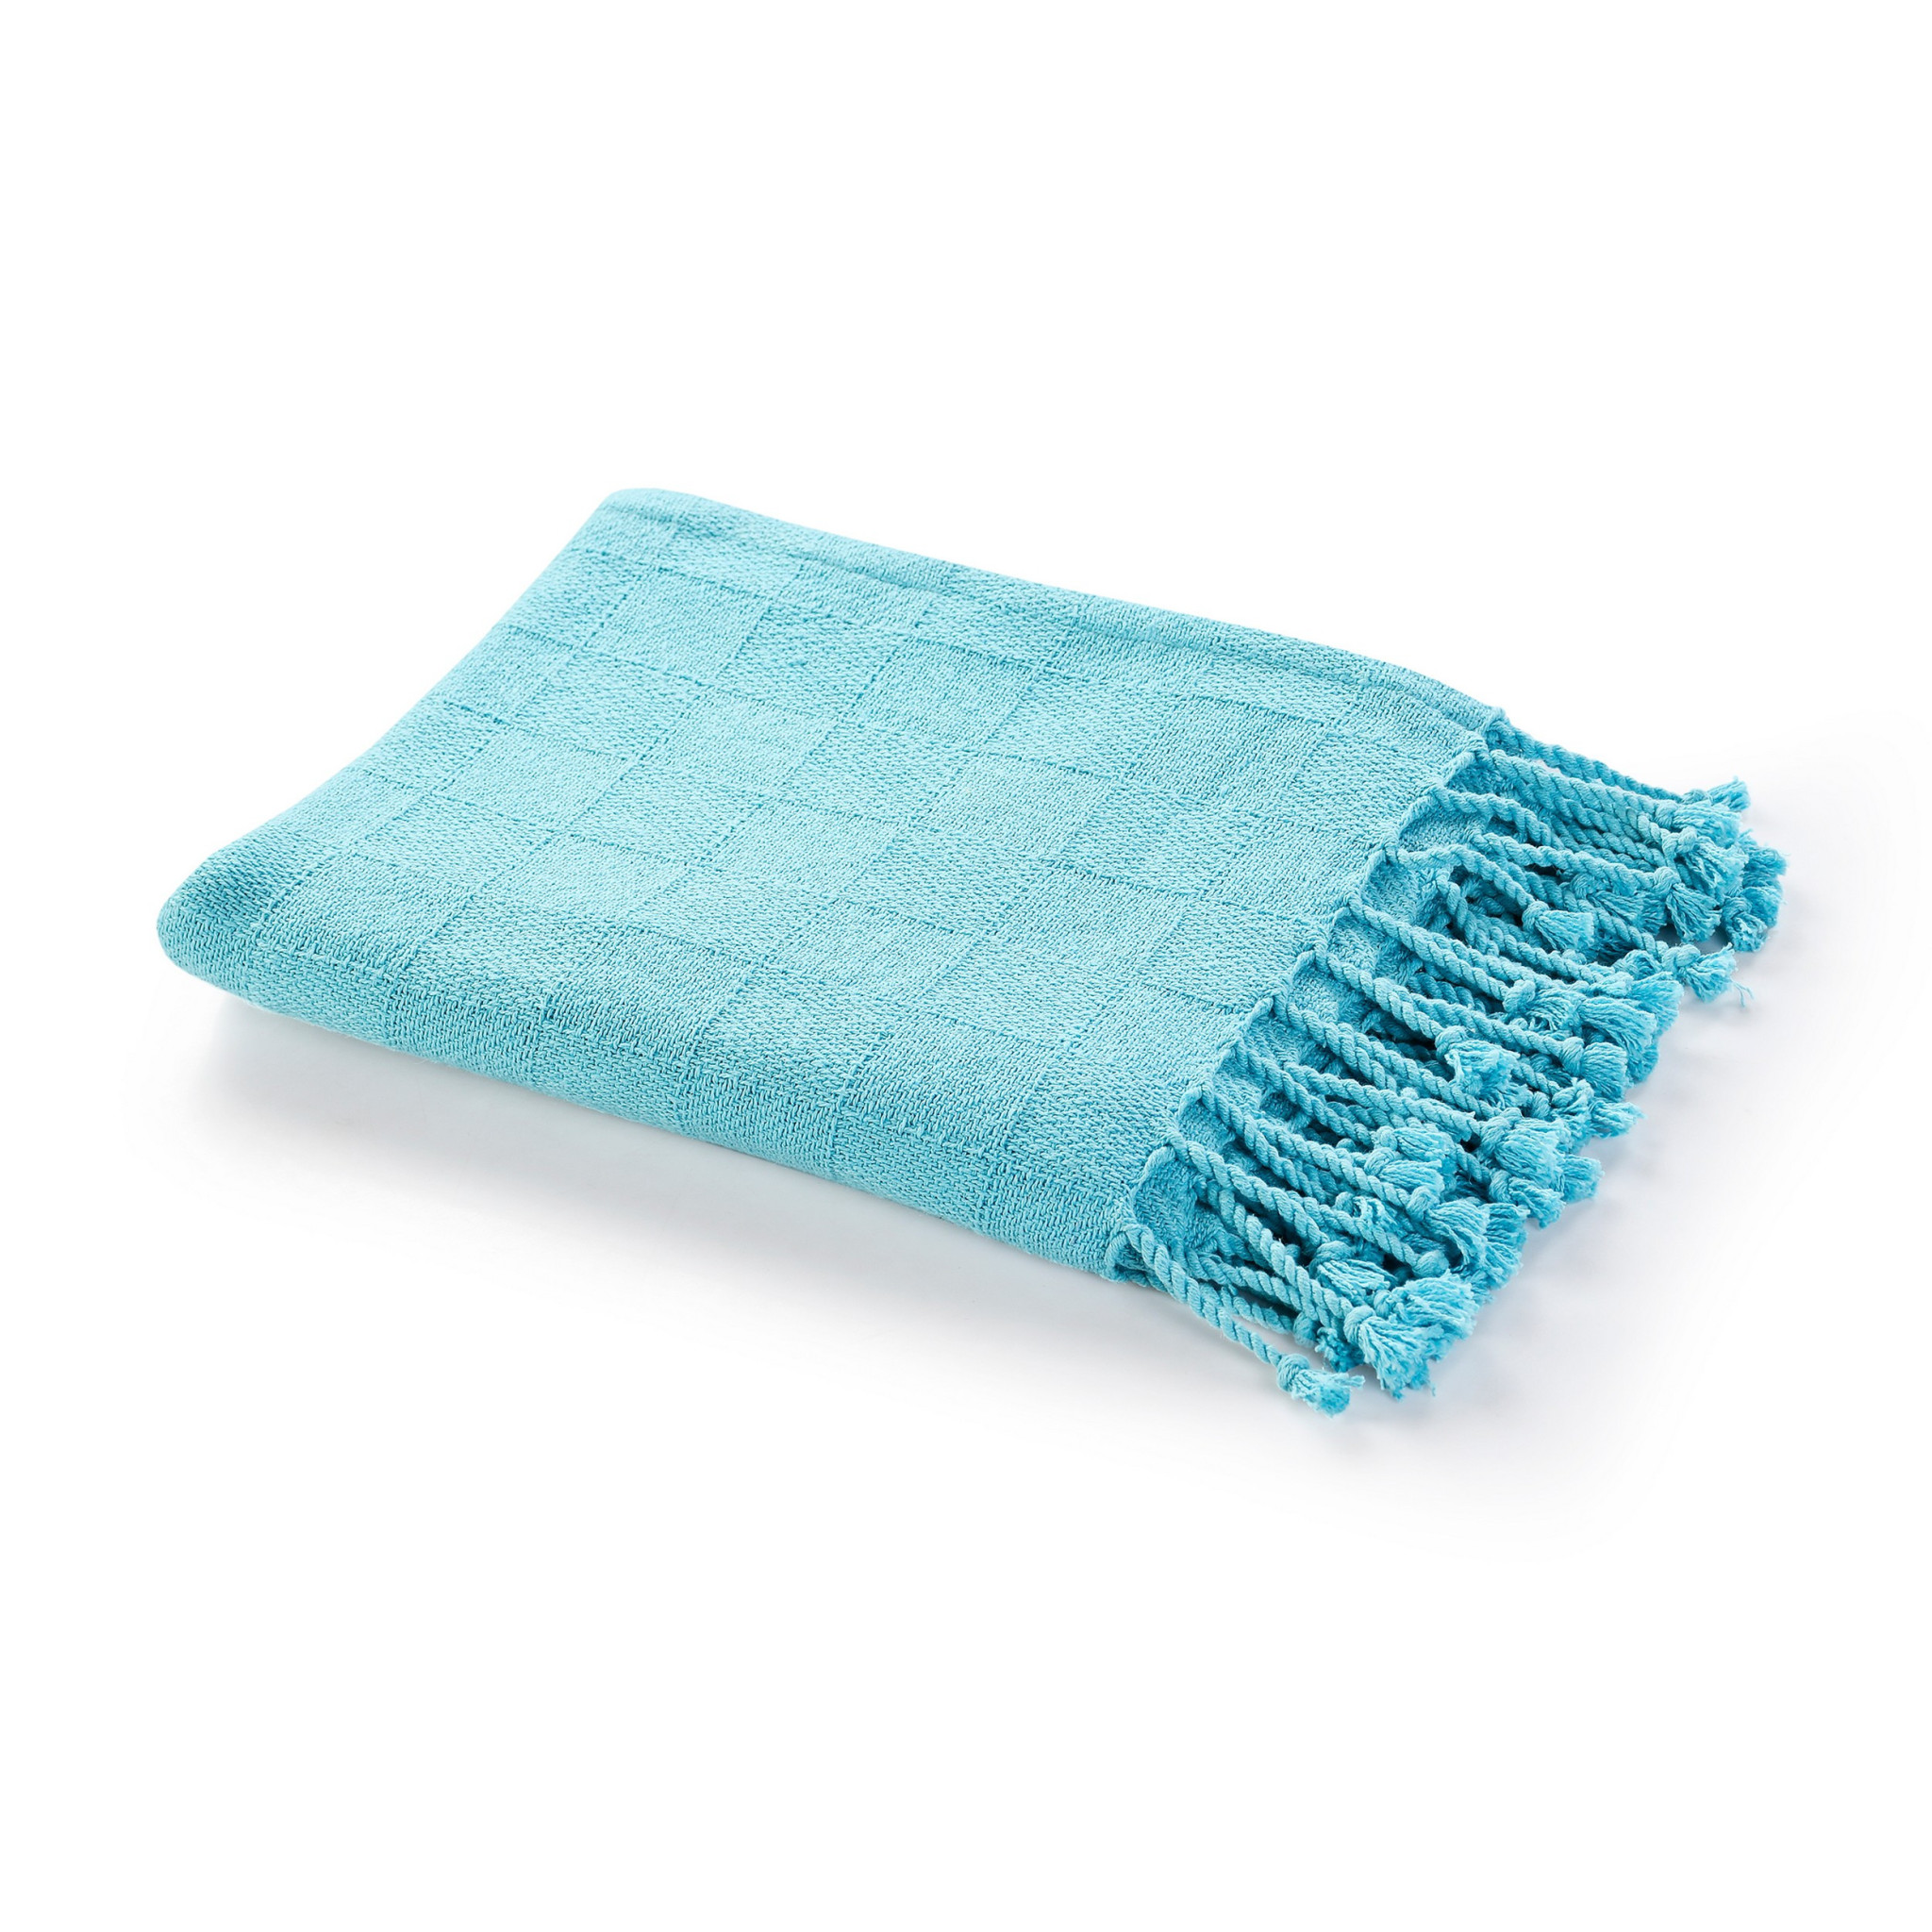 Blue Woven Cotton Solid Color Throw Blanket-516561-1